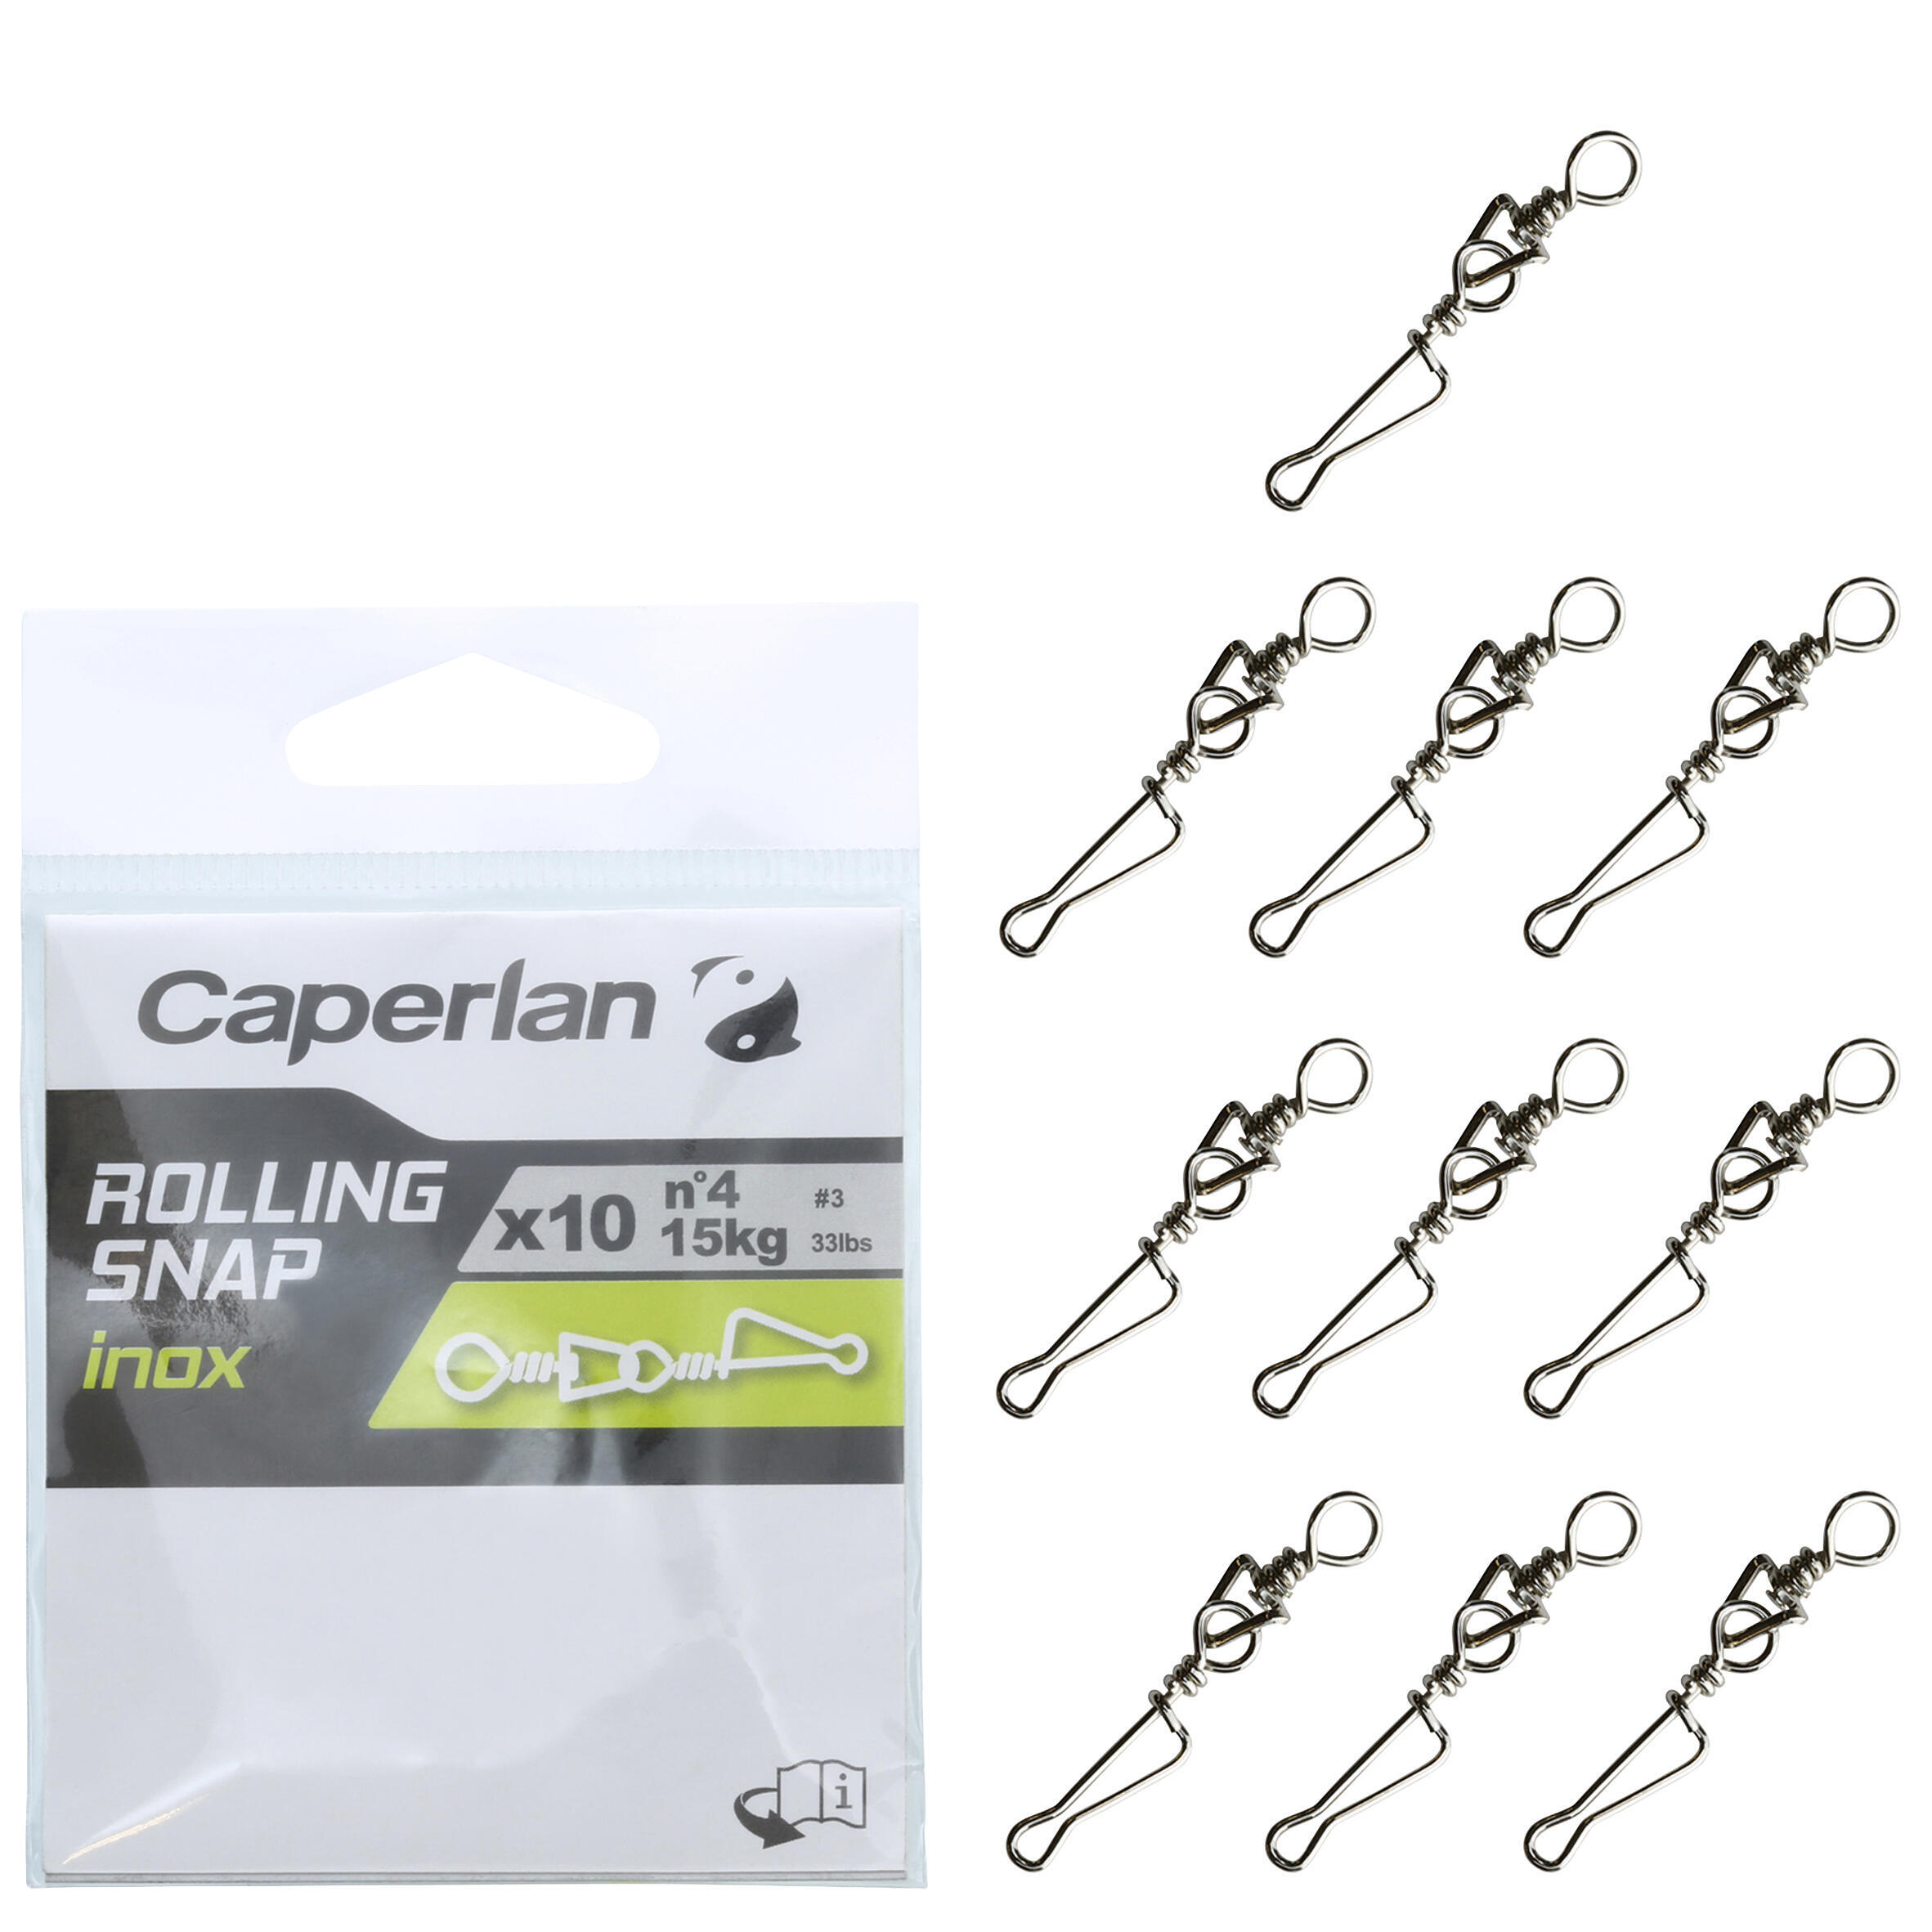 CAPERLAN STAINLESS STEEL SWIVEL CLIP ROLLING SNAP